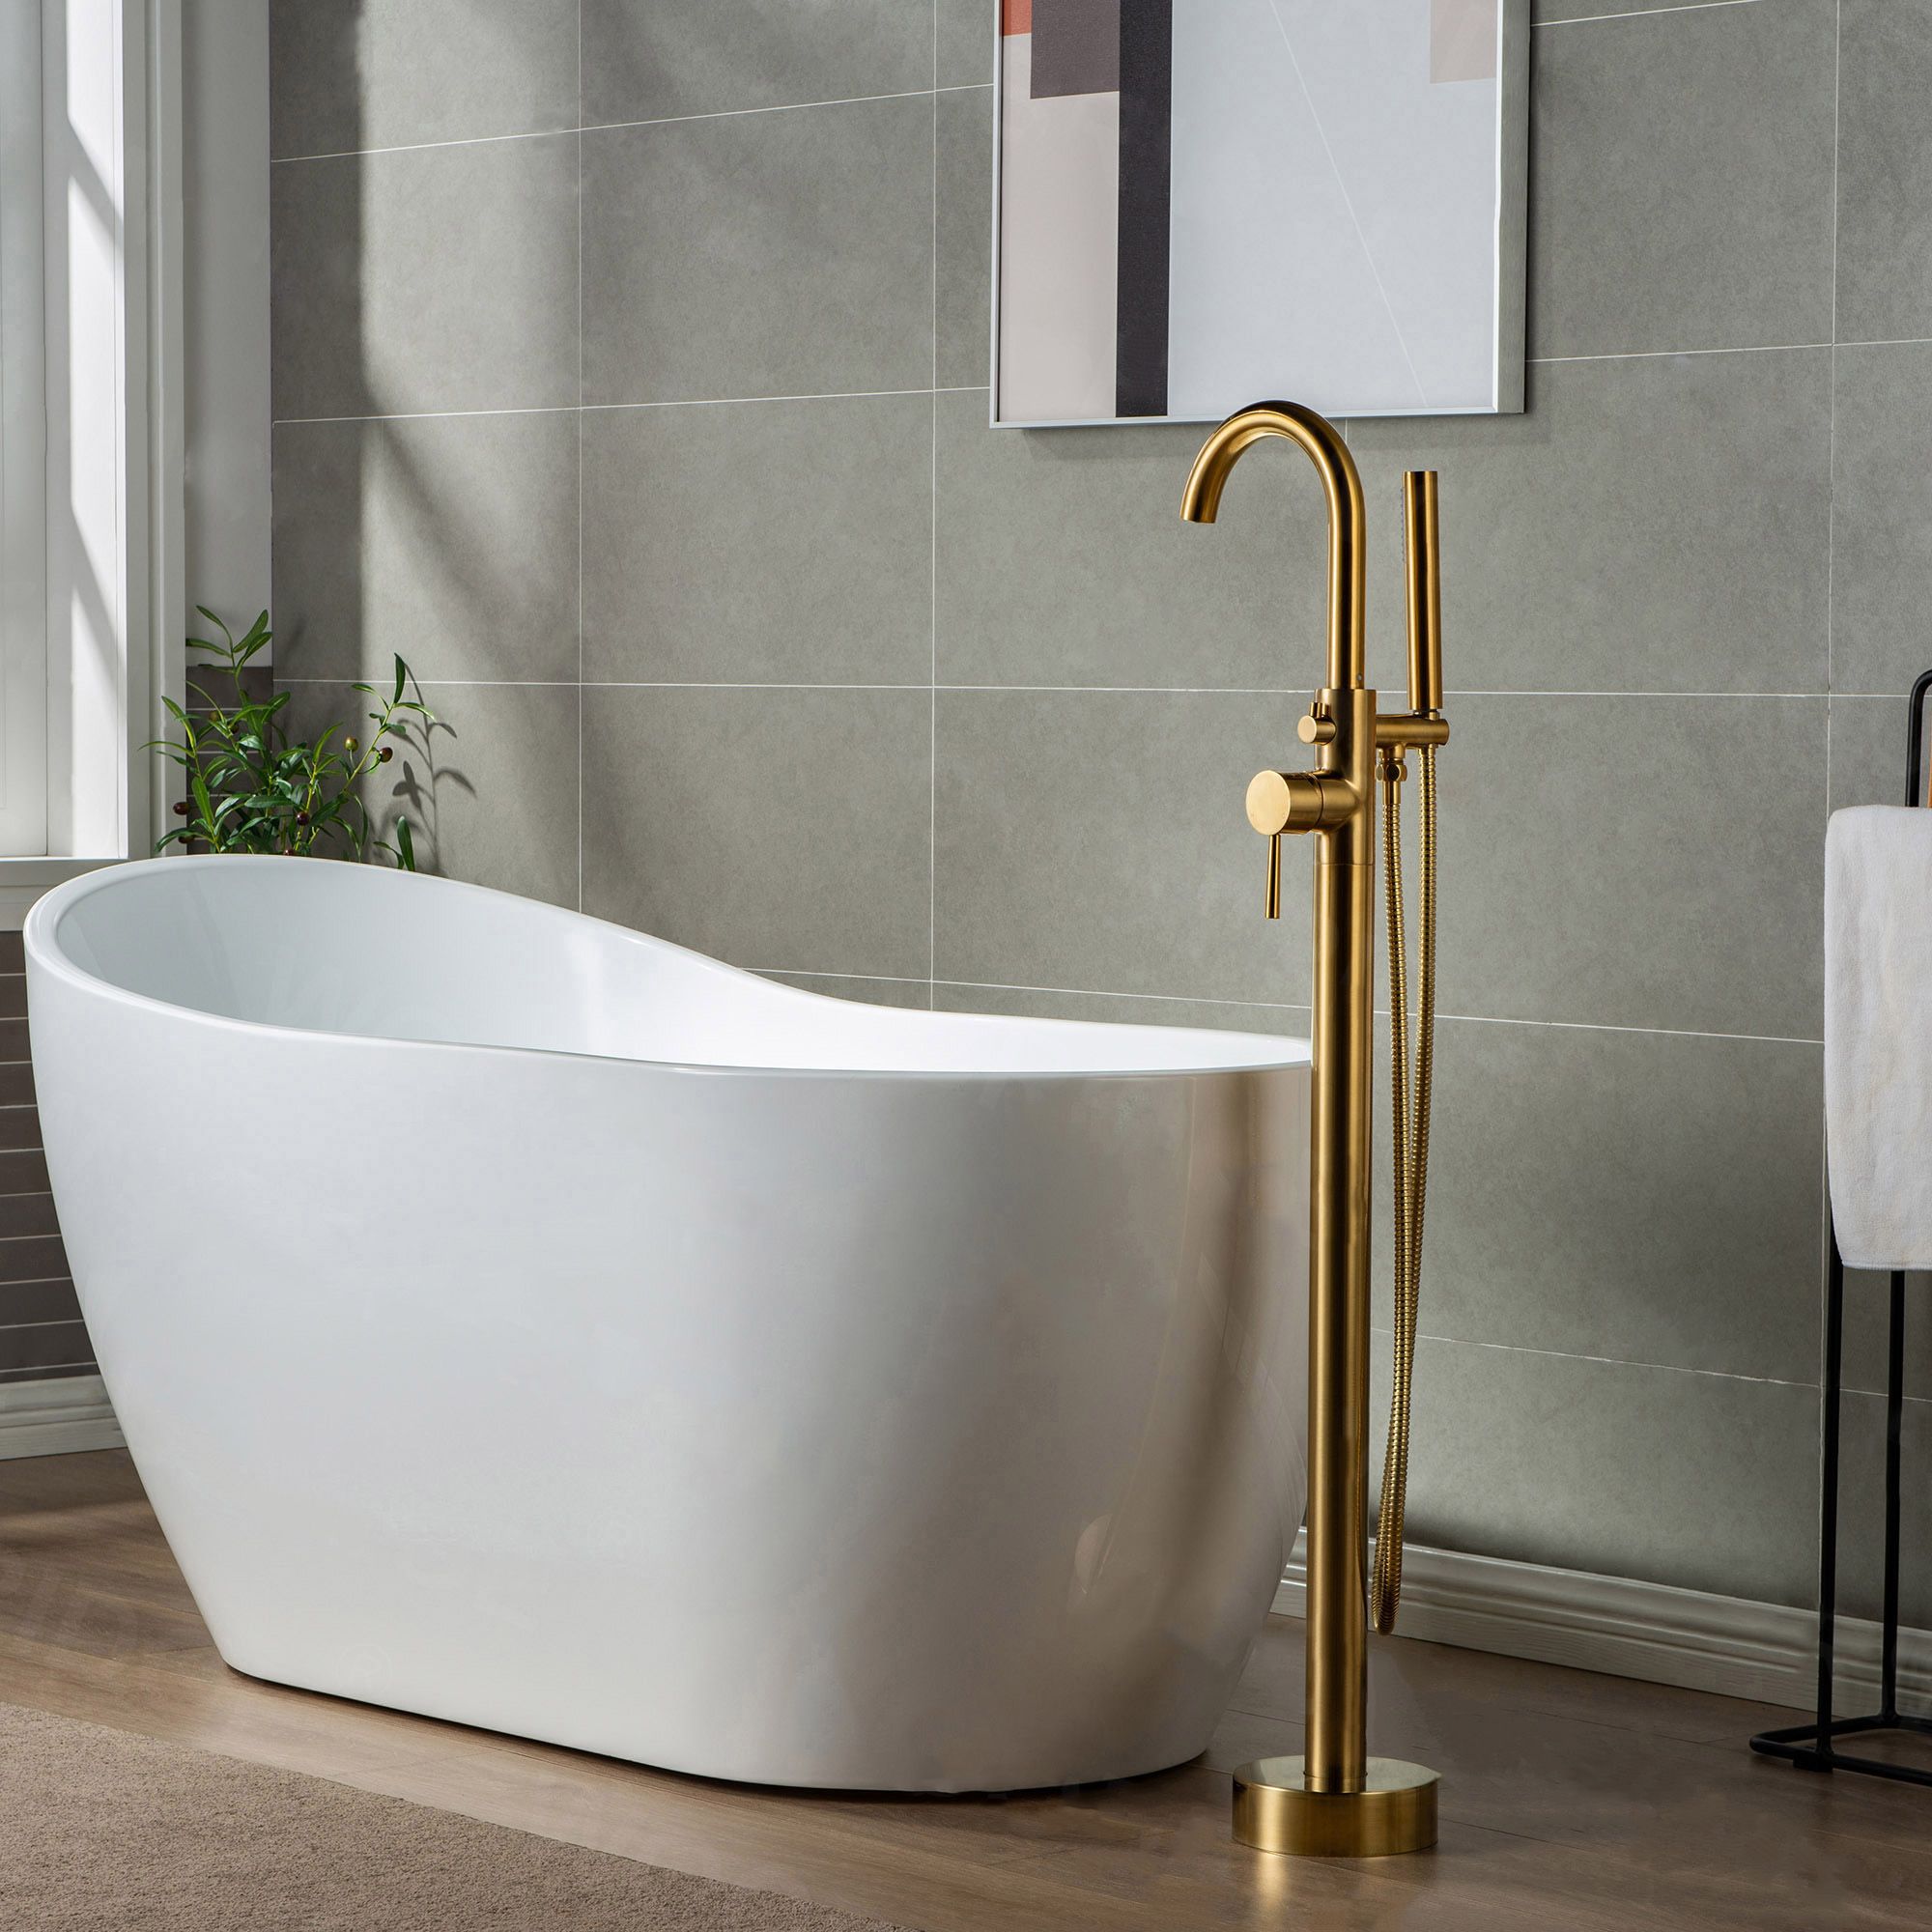  WOODBRIDGE F0007BGDR Contemporary Single Handle Floor Mount Freestanding Tub Filler Faucet with Hand shower in Brushed Gold Finish._14262